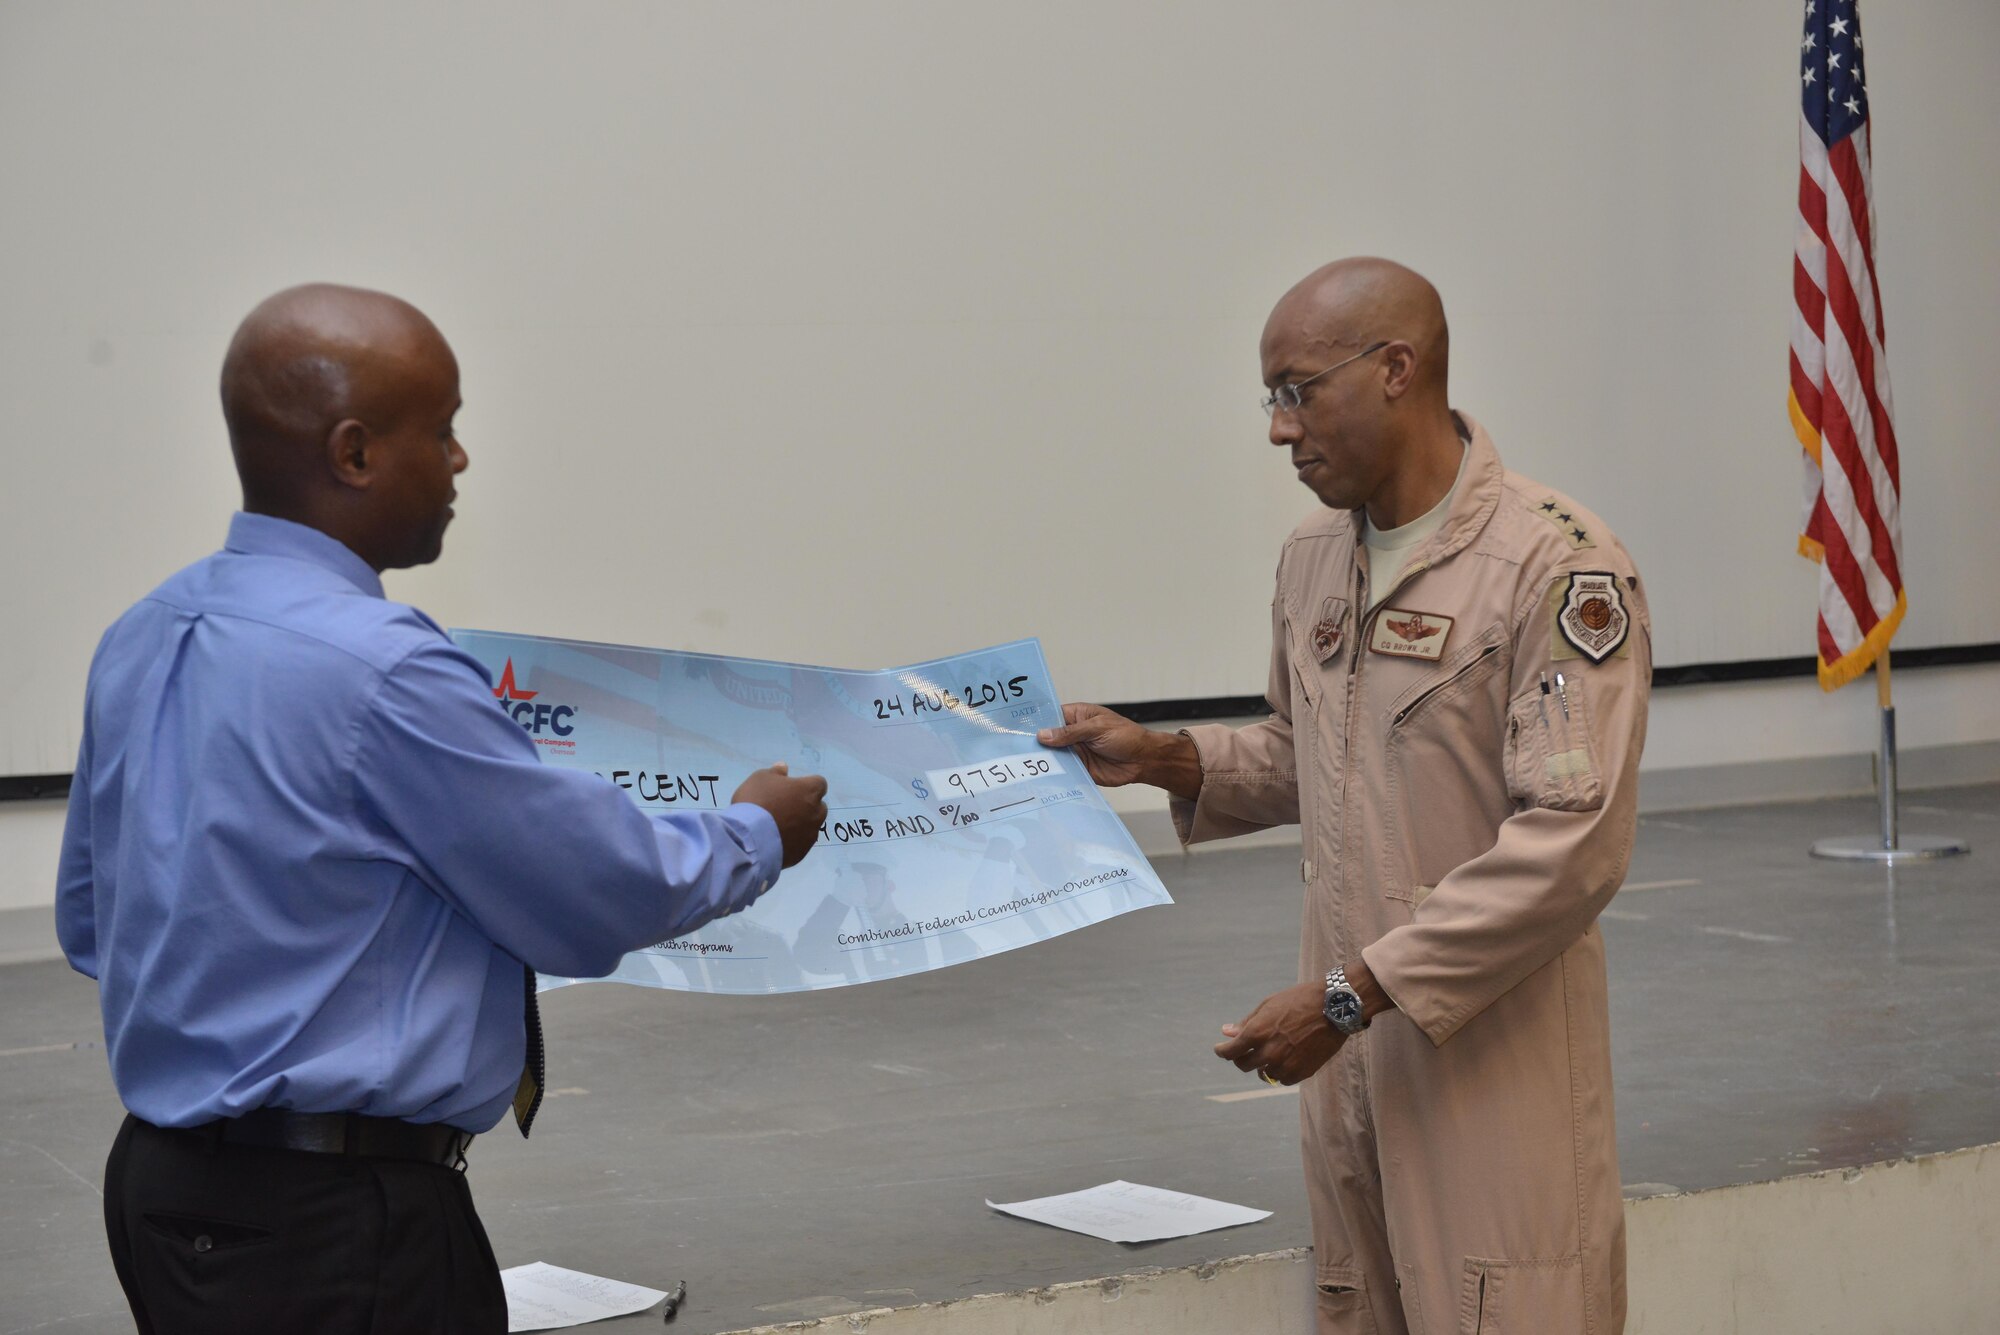 Chidley Lafontant, Combined Federal Campaign-Overseas manager, presents a check from 2014 CFC-O undesignated funds to Lt. Gen. CQ Brown Jr., U.S. Air Forces Central Command commander, who received it on behalf of AFCENT August 27, 2015 at Al Udeid Air Base, Qatar. CFC gives military members the opportunity to contribute through donations for various charities. The campaign will begin September 21st and run through November 21st. (U.S. Air Force photo/Staff Sgt. Alexandre Montes)